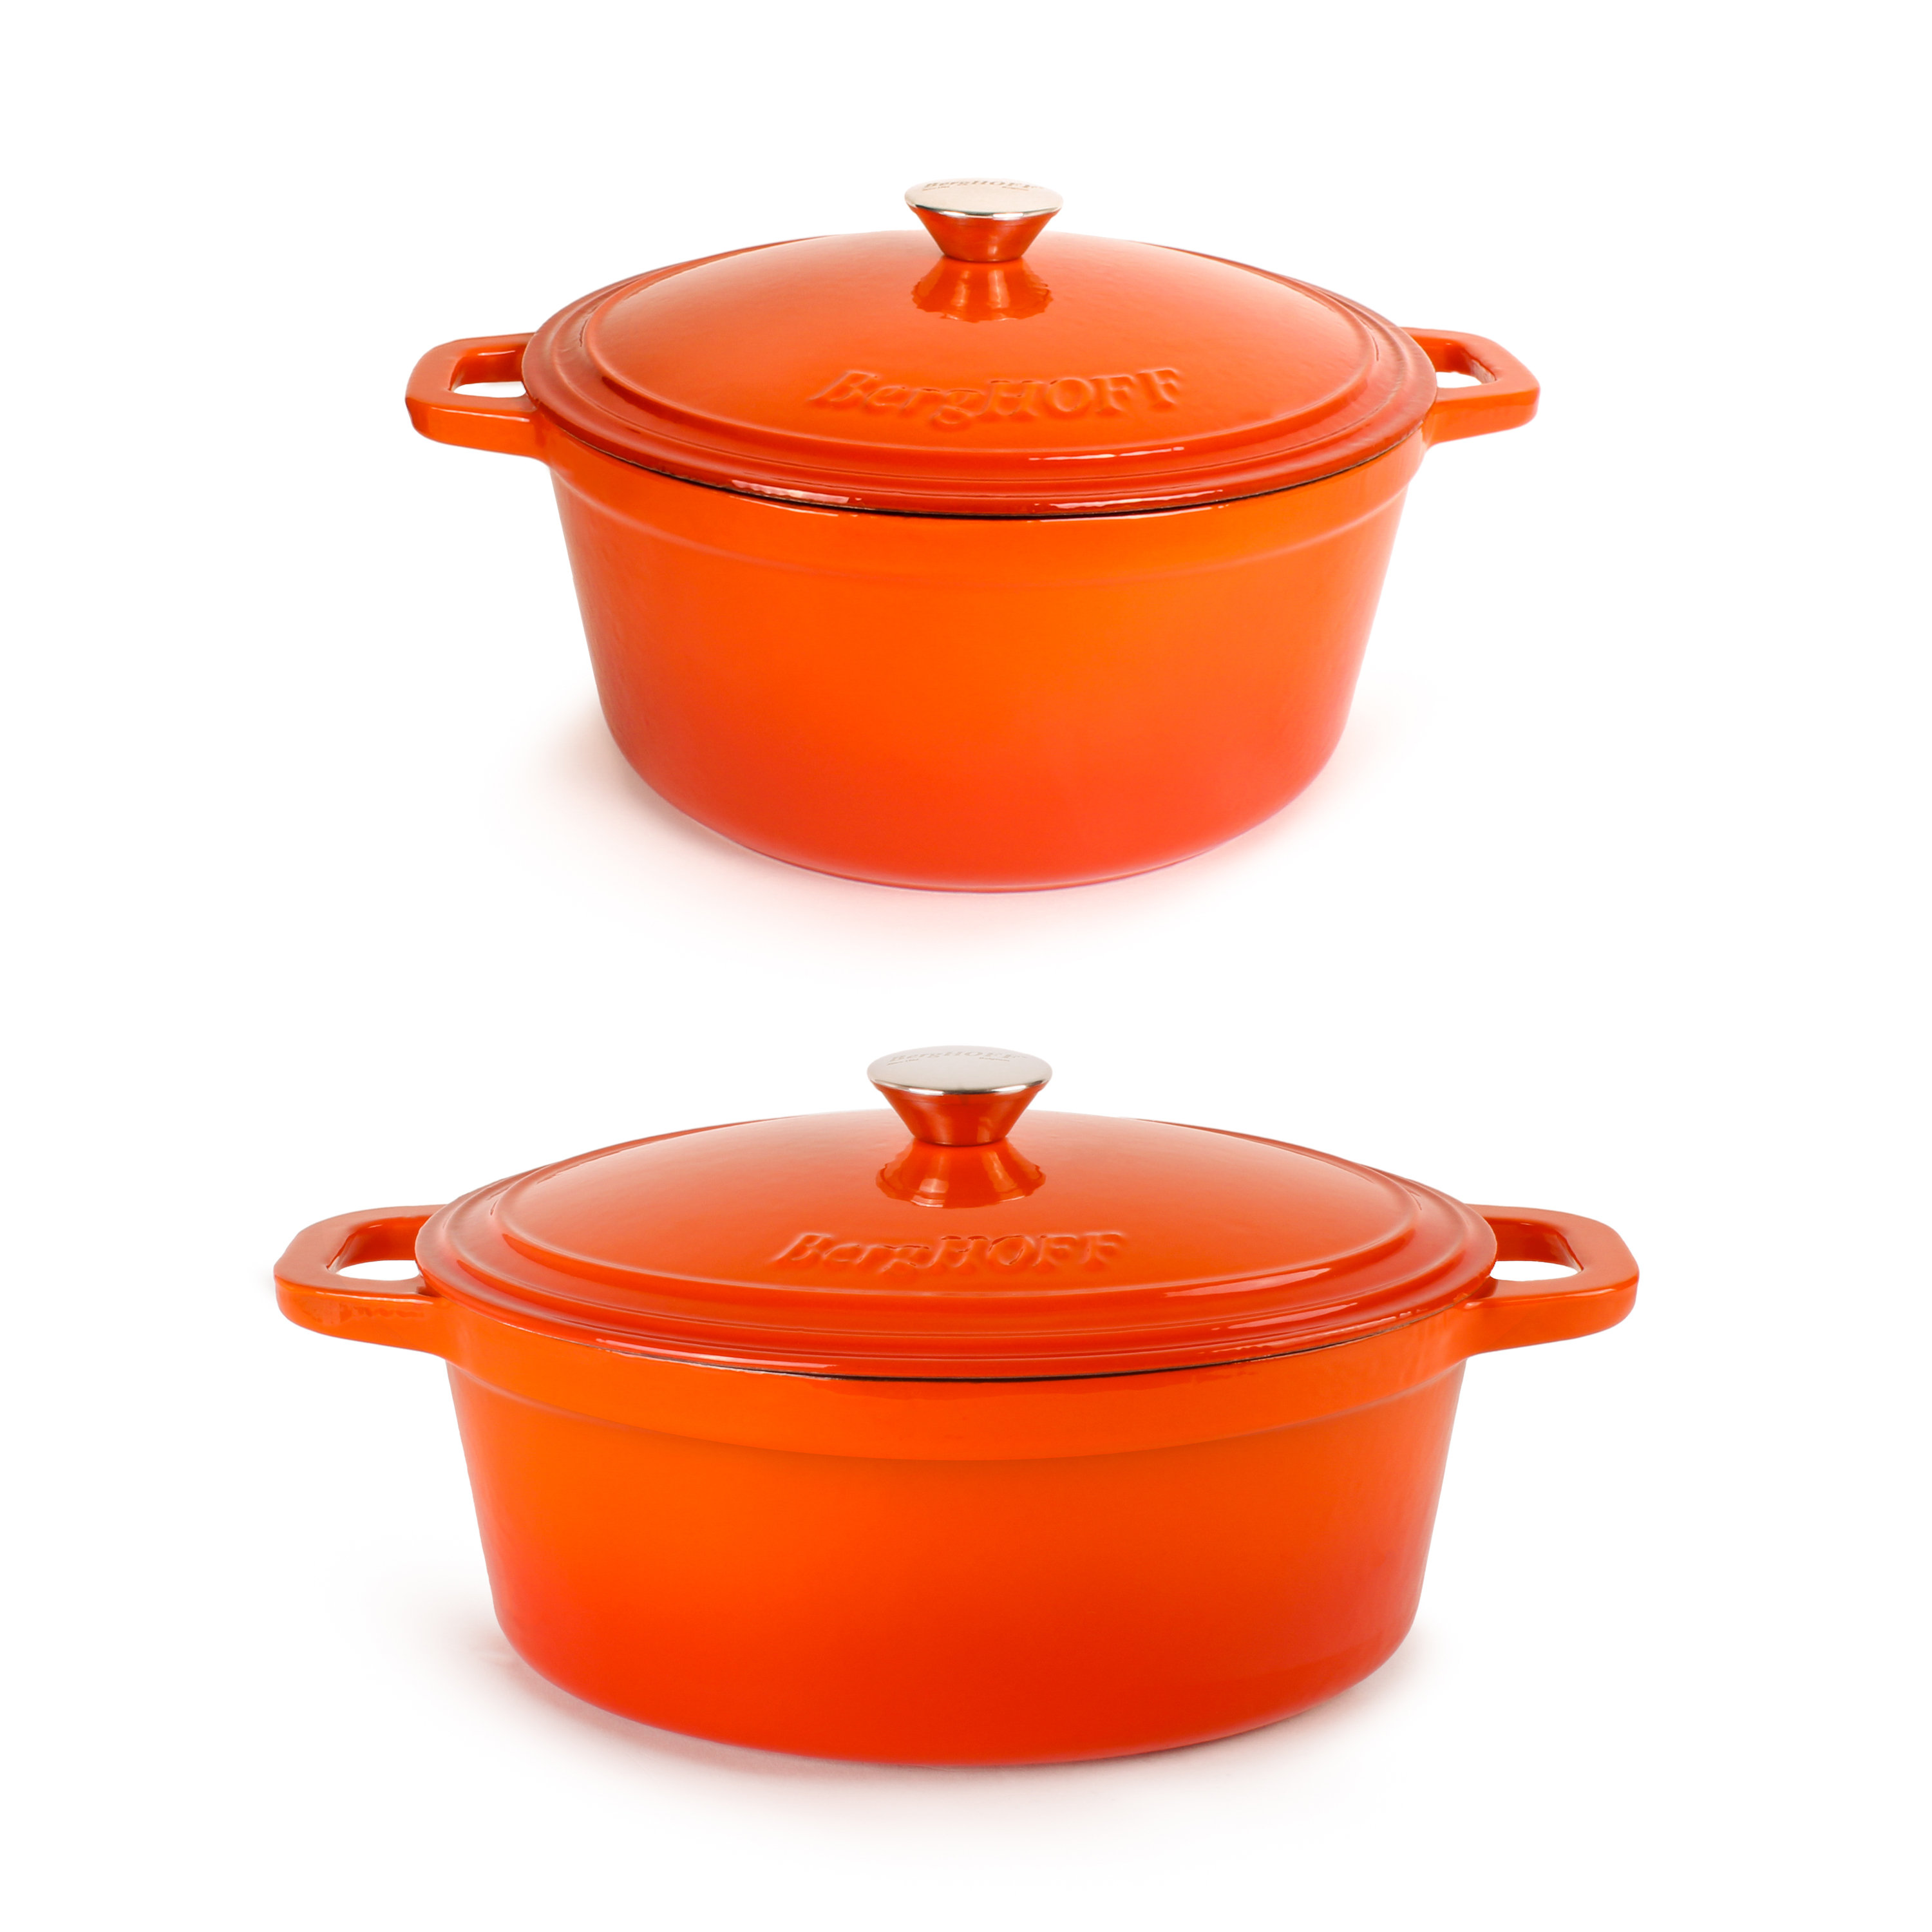 BergHOFF Neo 8 qt Cast Iron Oval Covered Casserole, Red